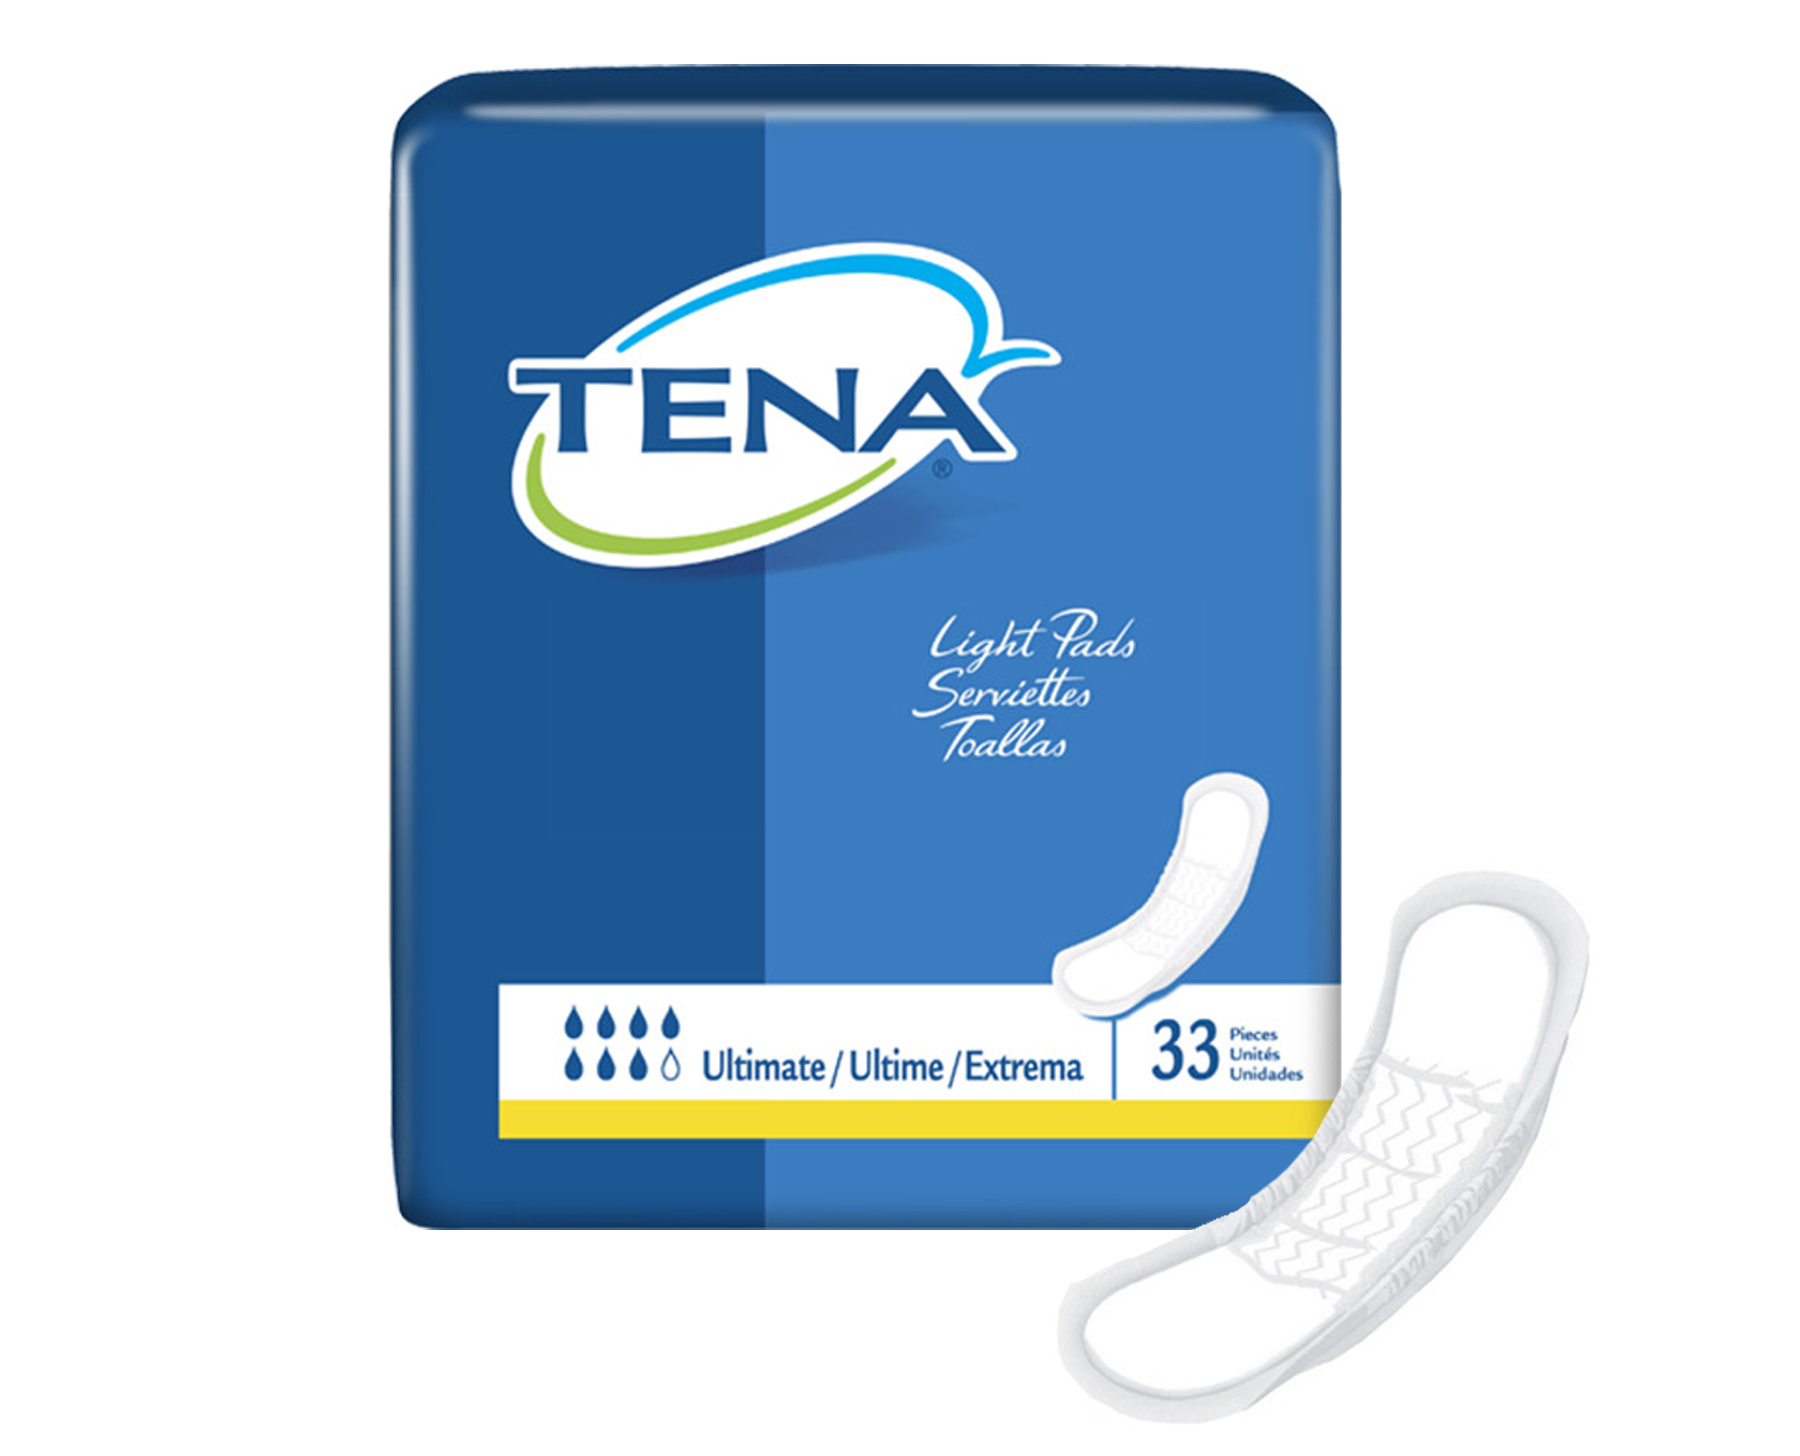 TENA Light Incontinence Pads, Ultimate Absorbency, 47709 Case of 99